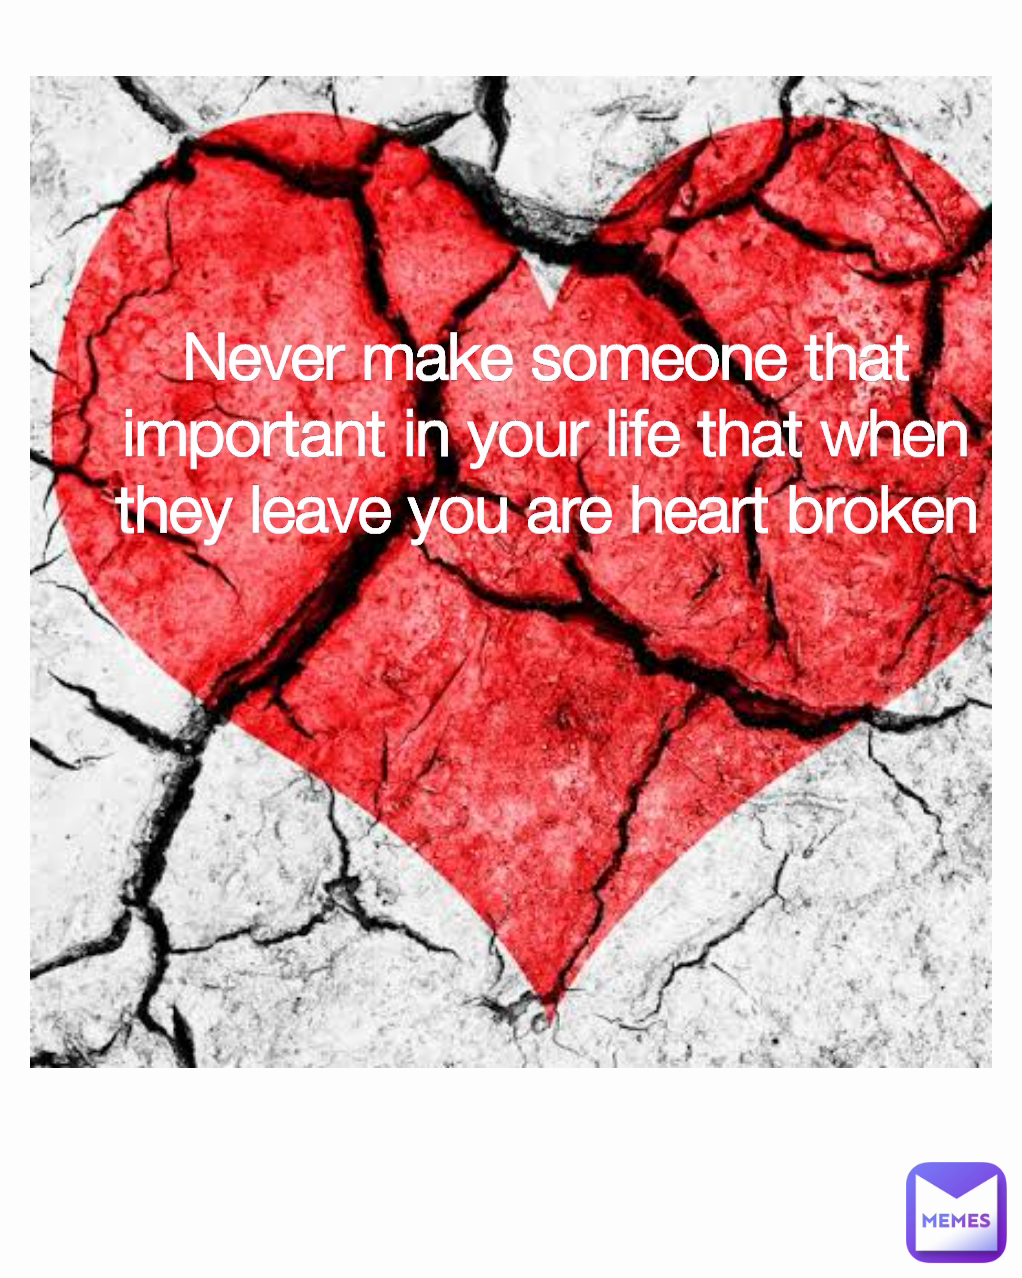 Never make someone that important in your life that when they leave you are heart broken